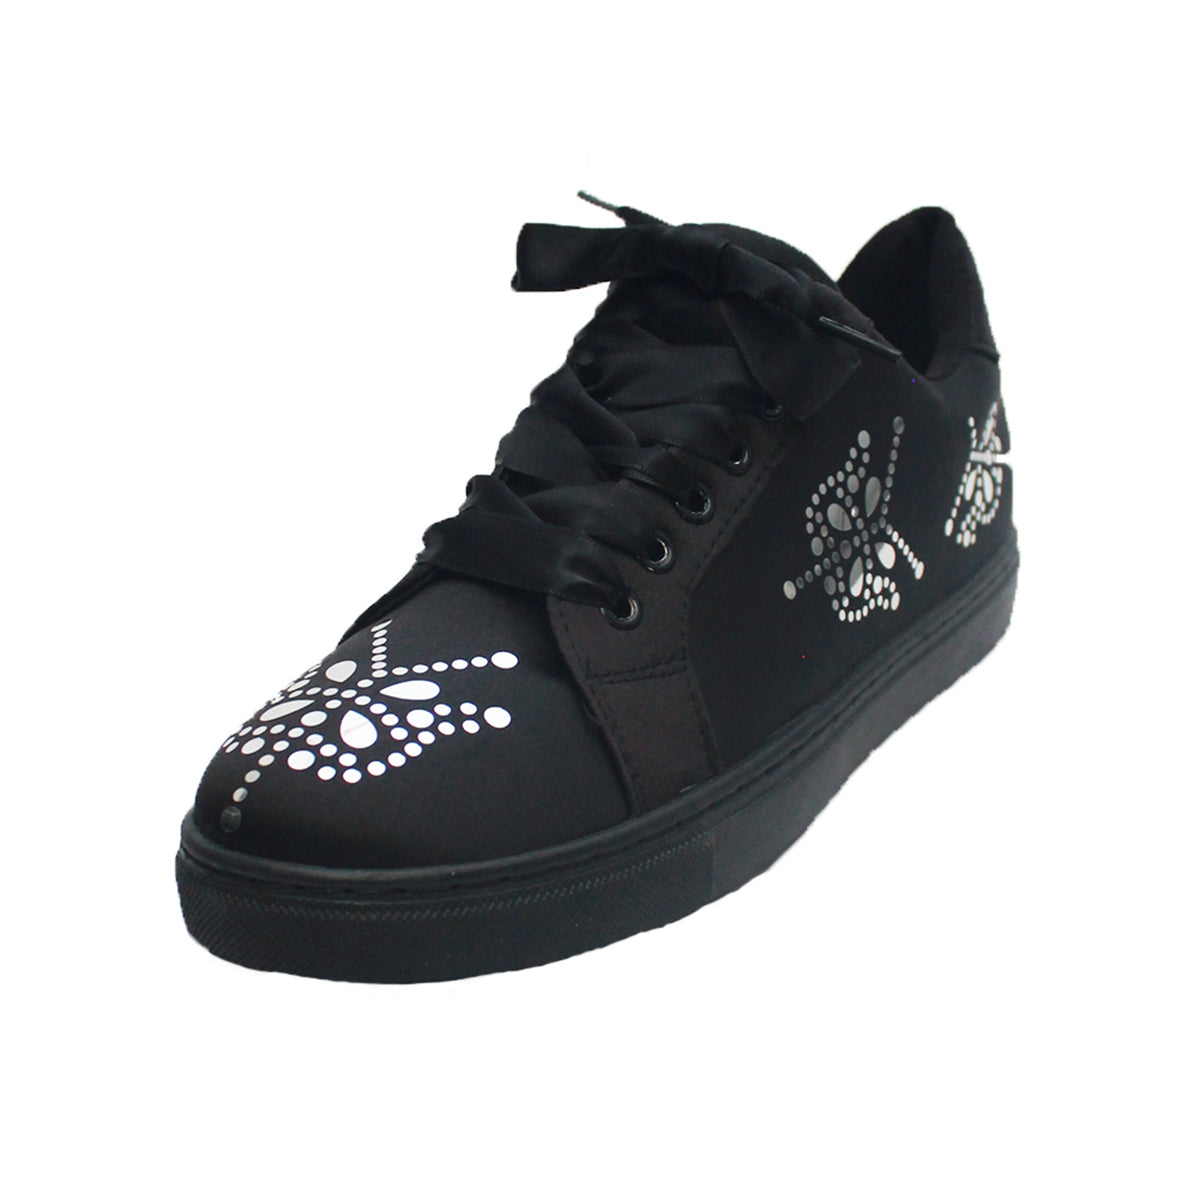 Black satin trainers with silver sparkly detail